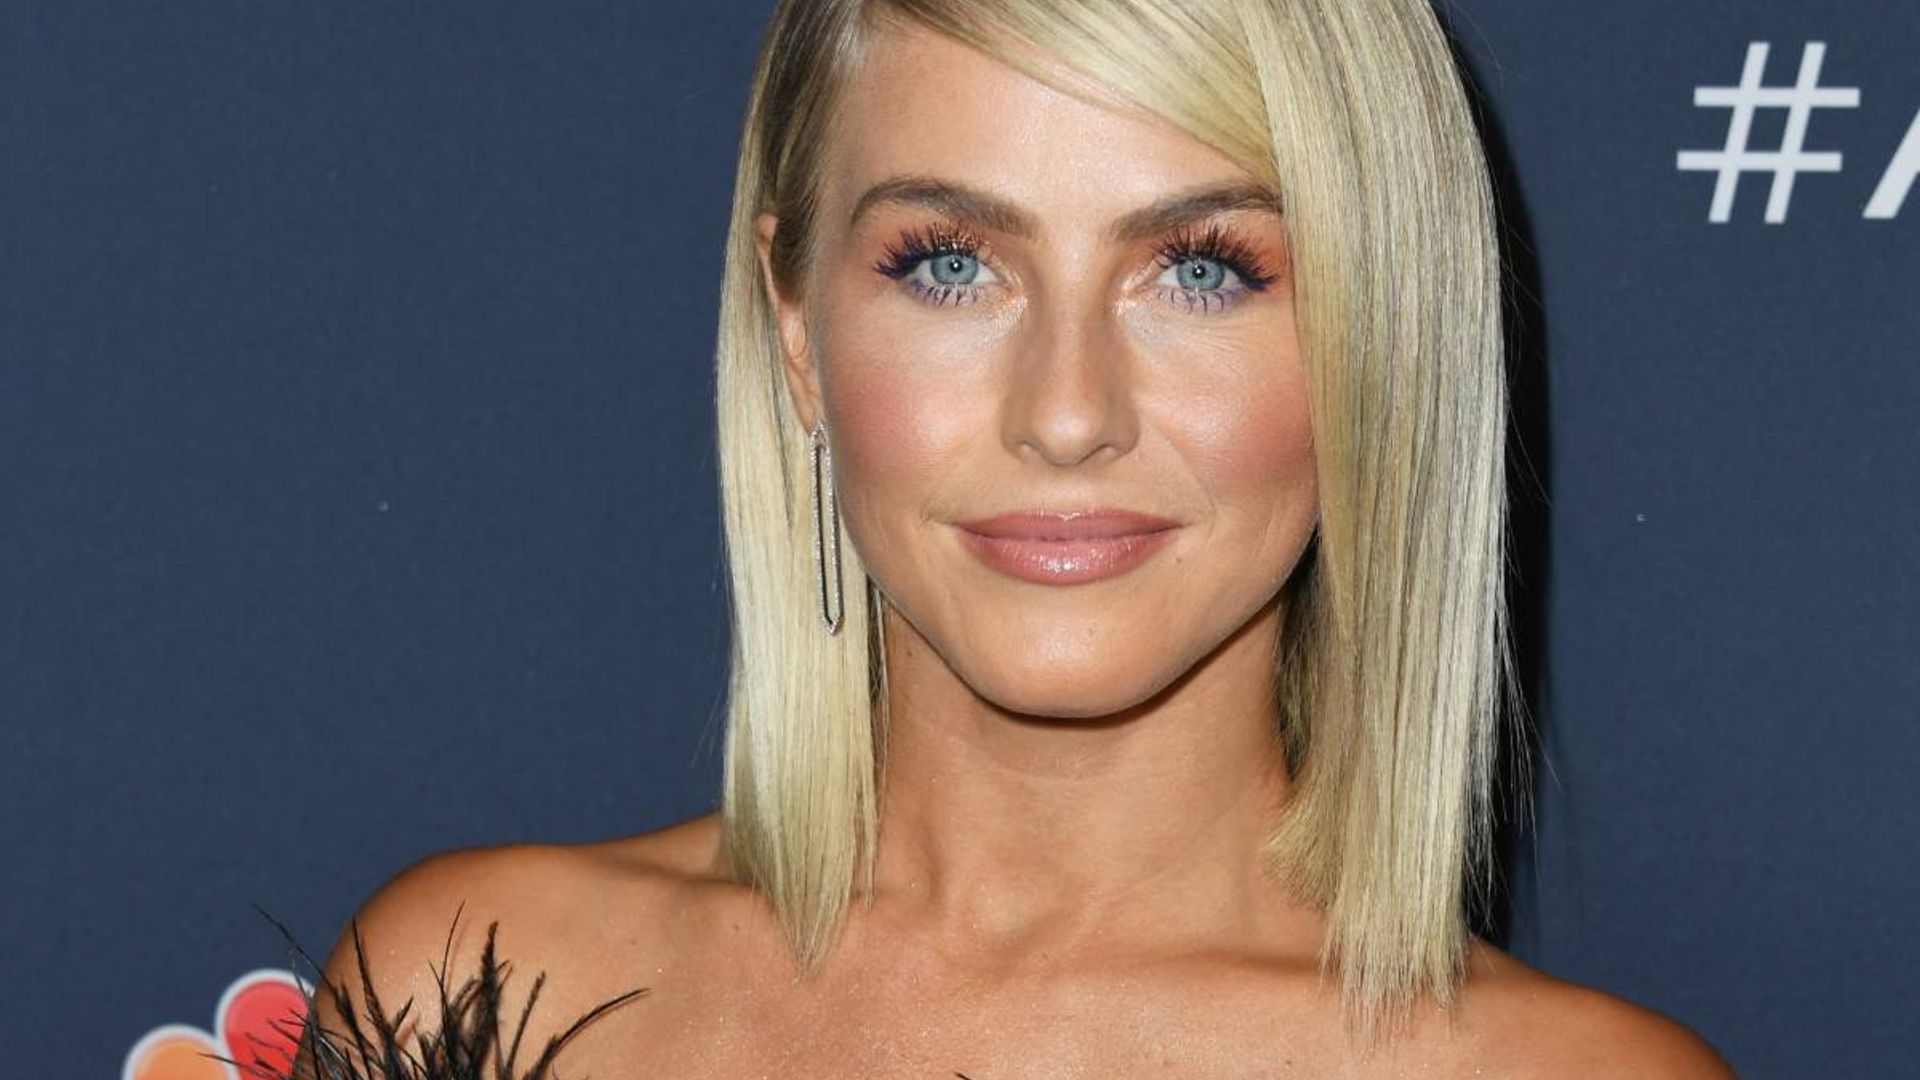 antonio williams recommends Has Julianne Hough Been Nude